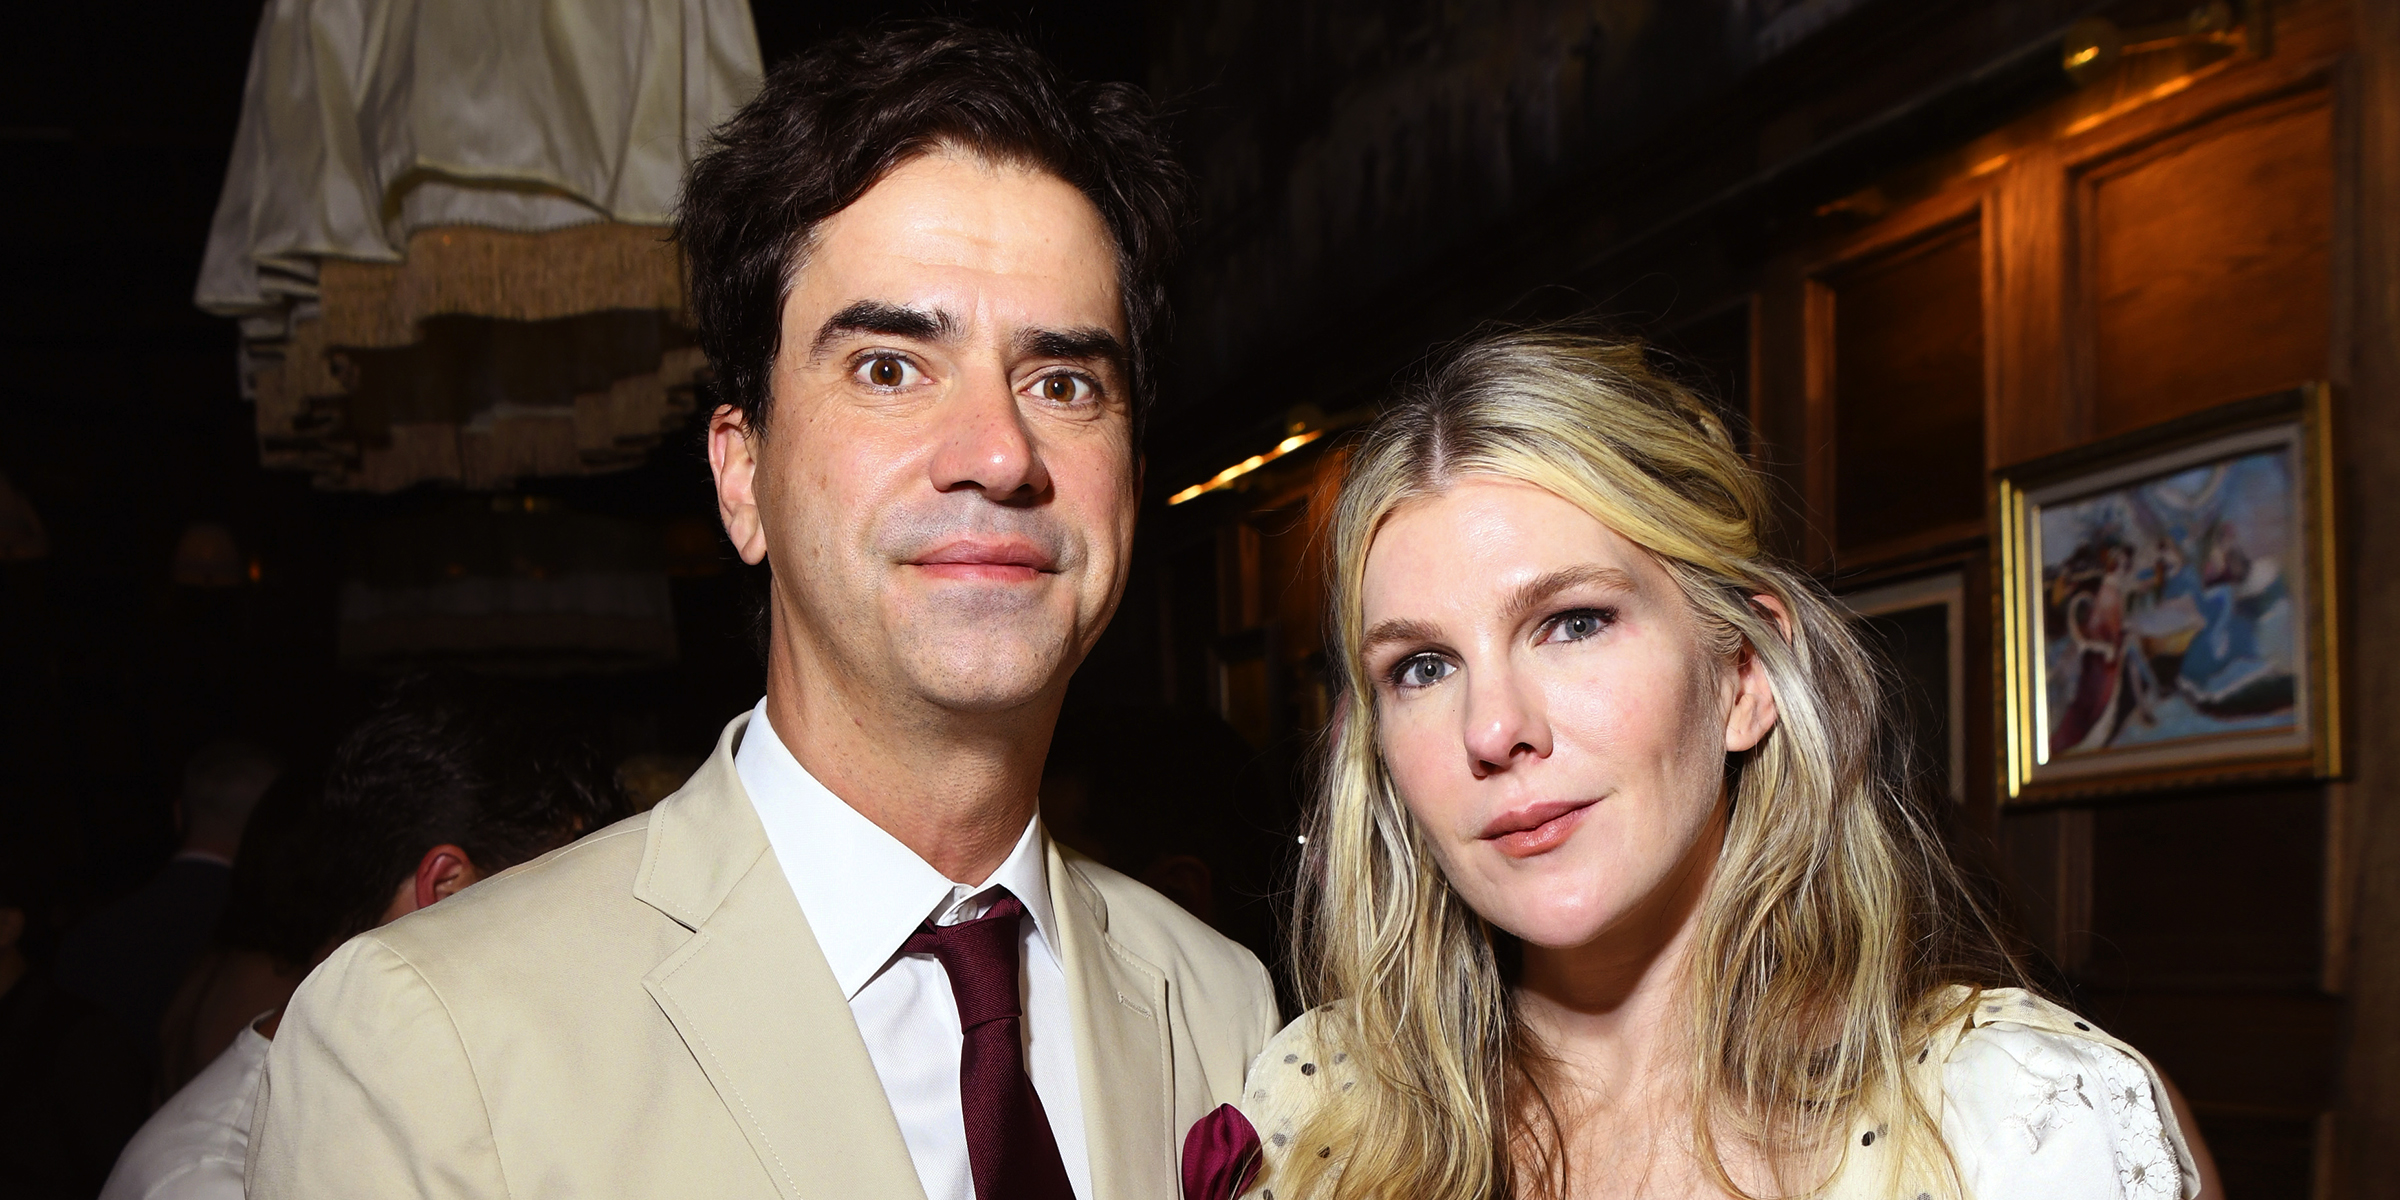 Hamish Linklater and Lily Rabe | Source: Getty Images